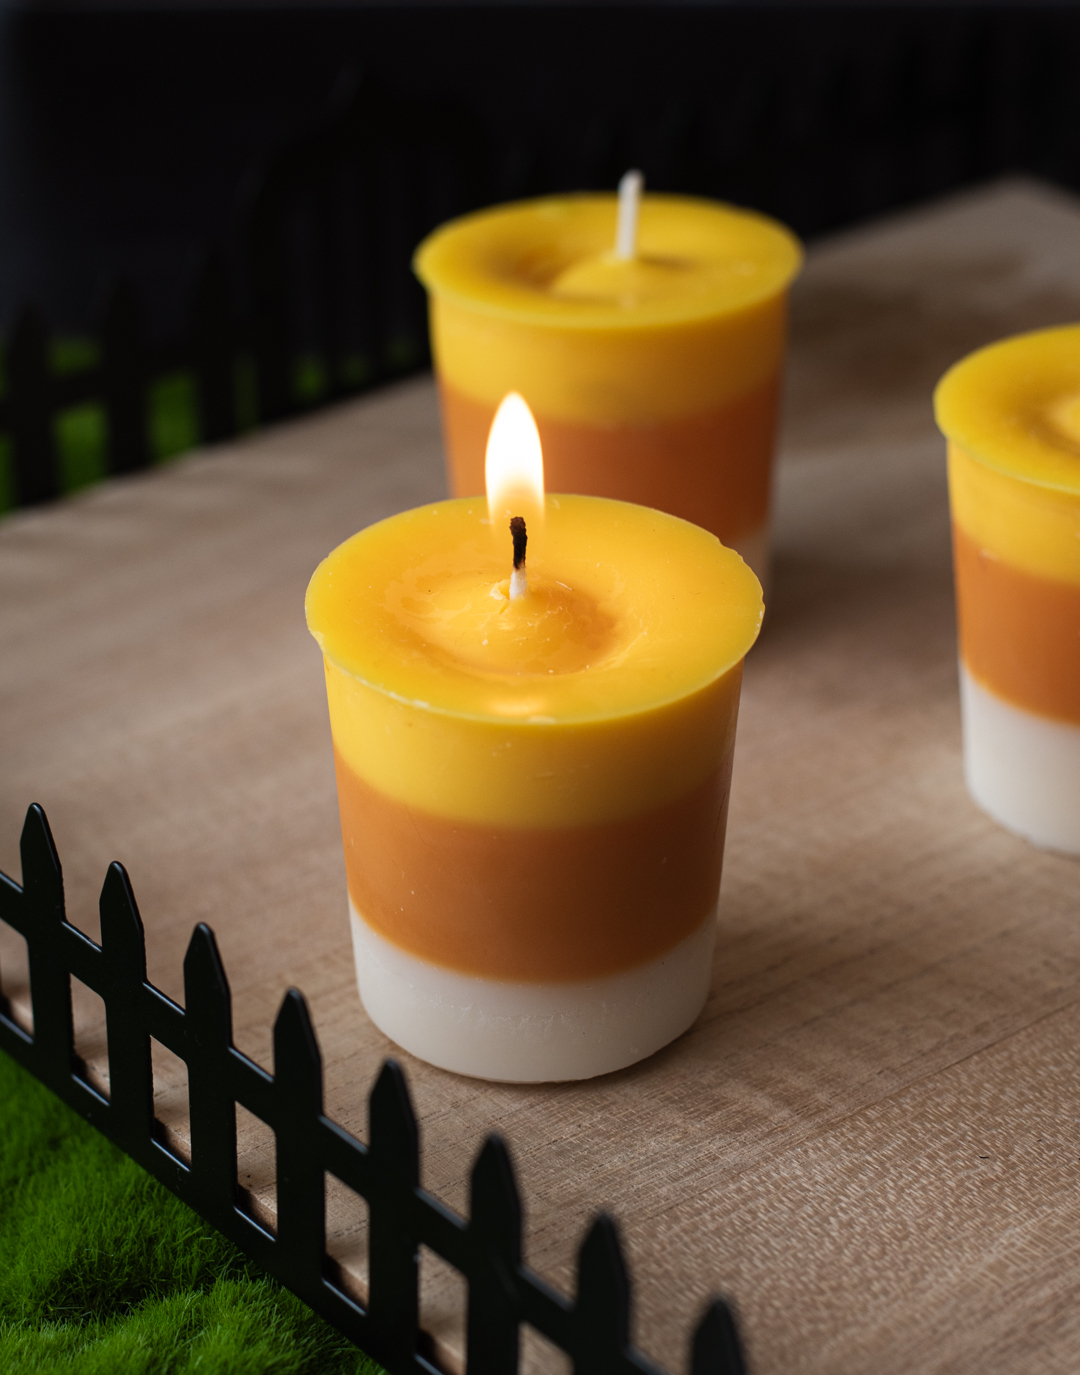 Votive candles dyed in layers of white, orange, and yellow to resemble candy corn.